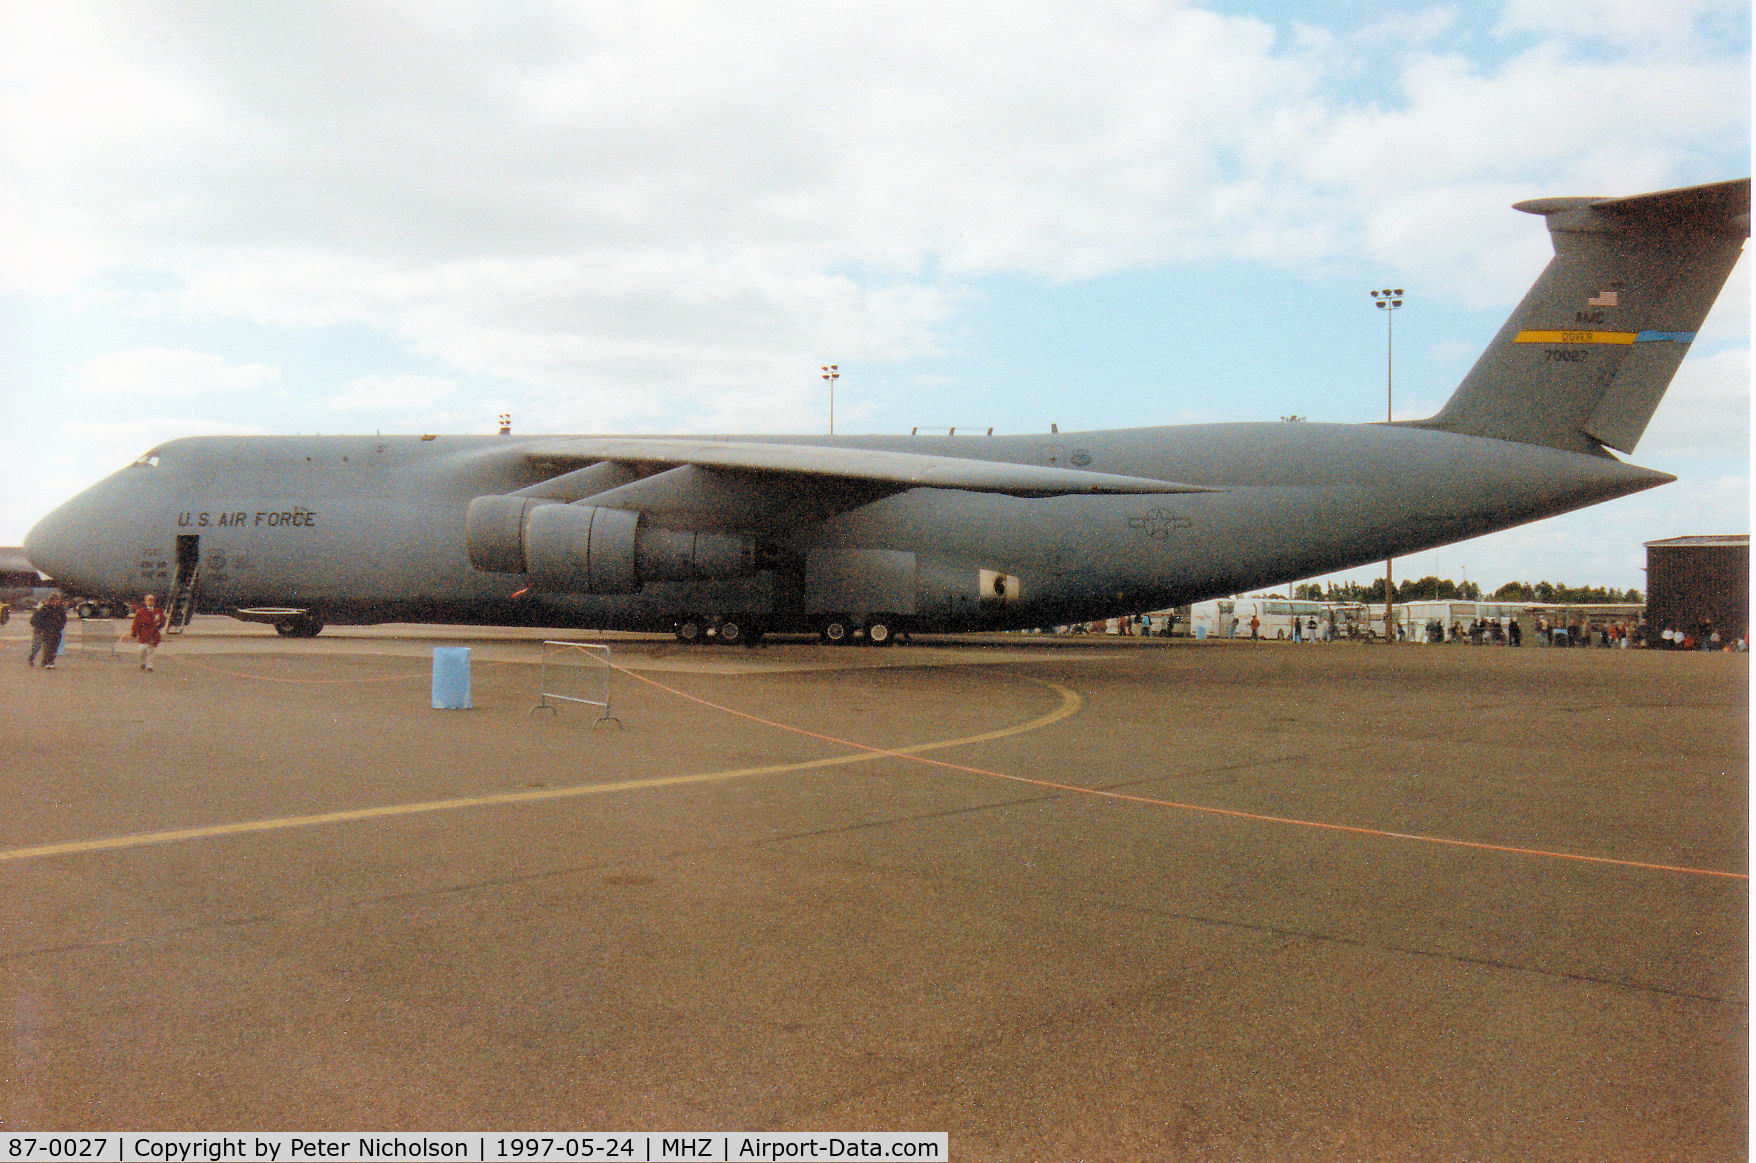 87-0027, 1987 Lockheed C-5B Galaxy C/N 500-0113, C-5B Galaxy, callsign Reach 7027, of the 436th Airlift Wing based at Dover AFB on display at the 1997 RAF Mildenhall Air Fete.